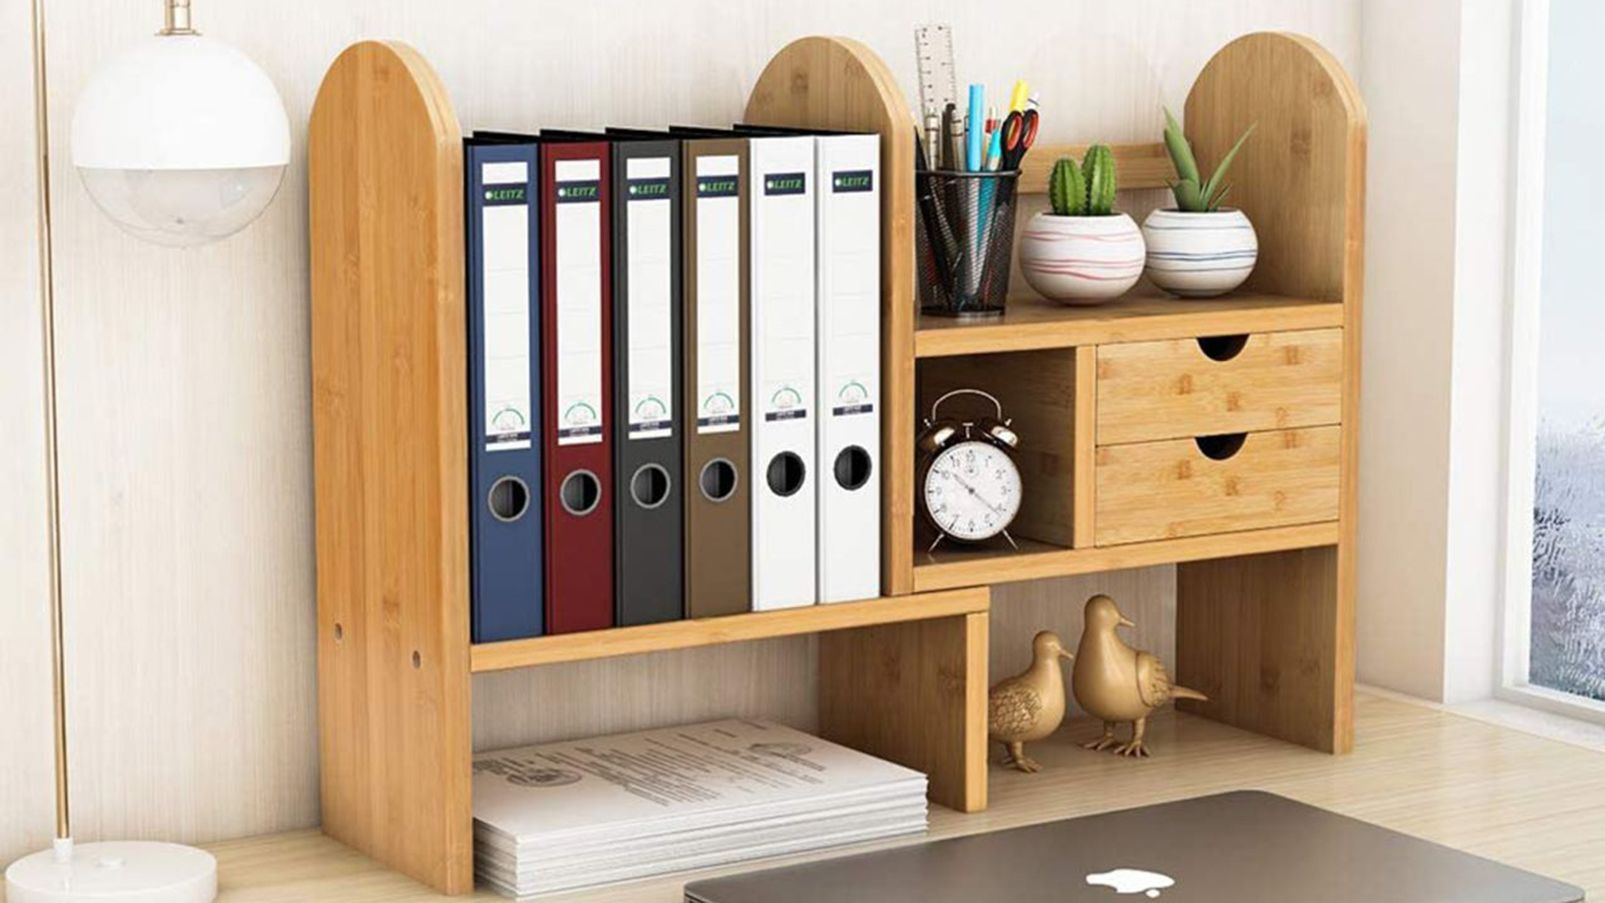 10 Cool, Must-Have Desk Accessories to Help Organize and Inspire